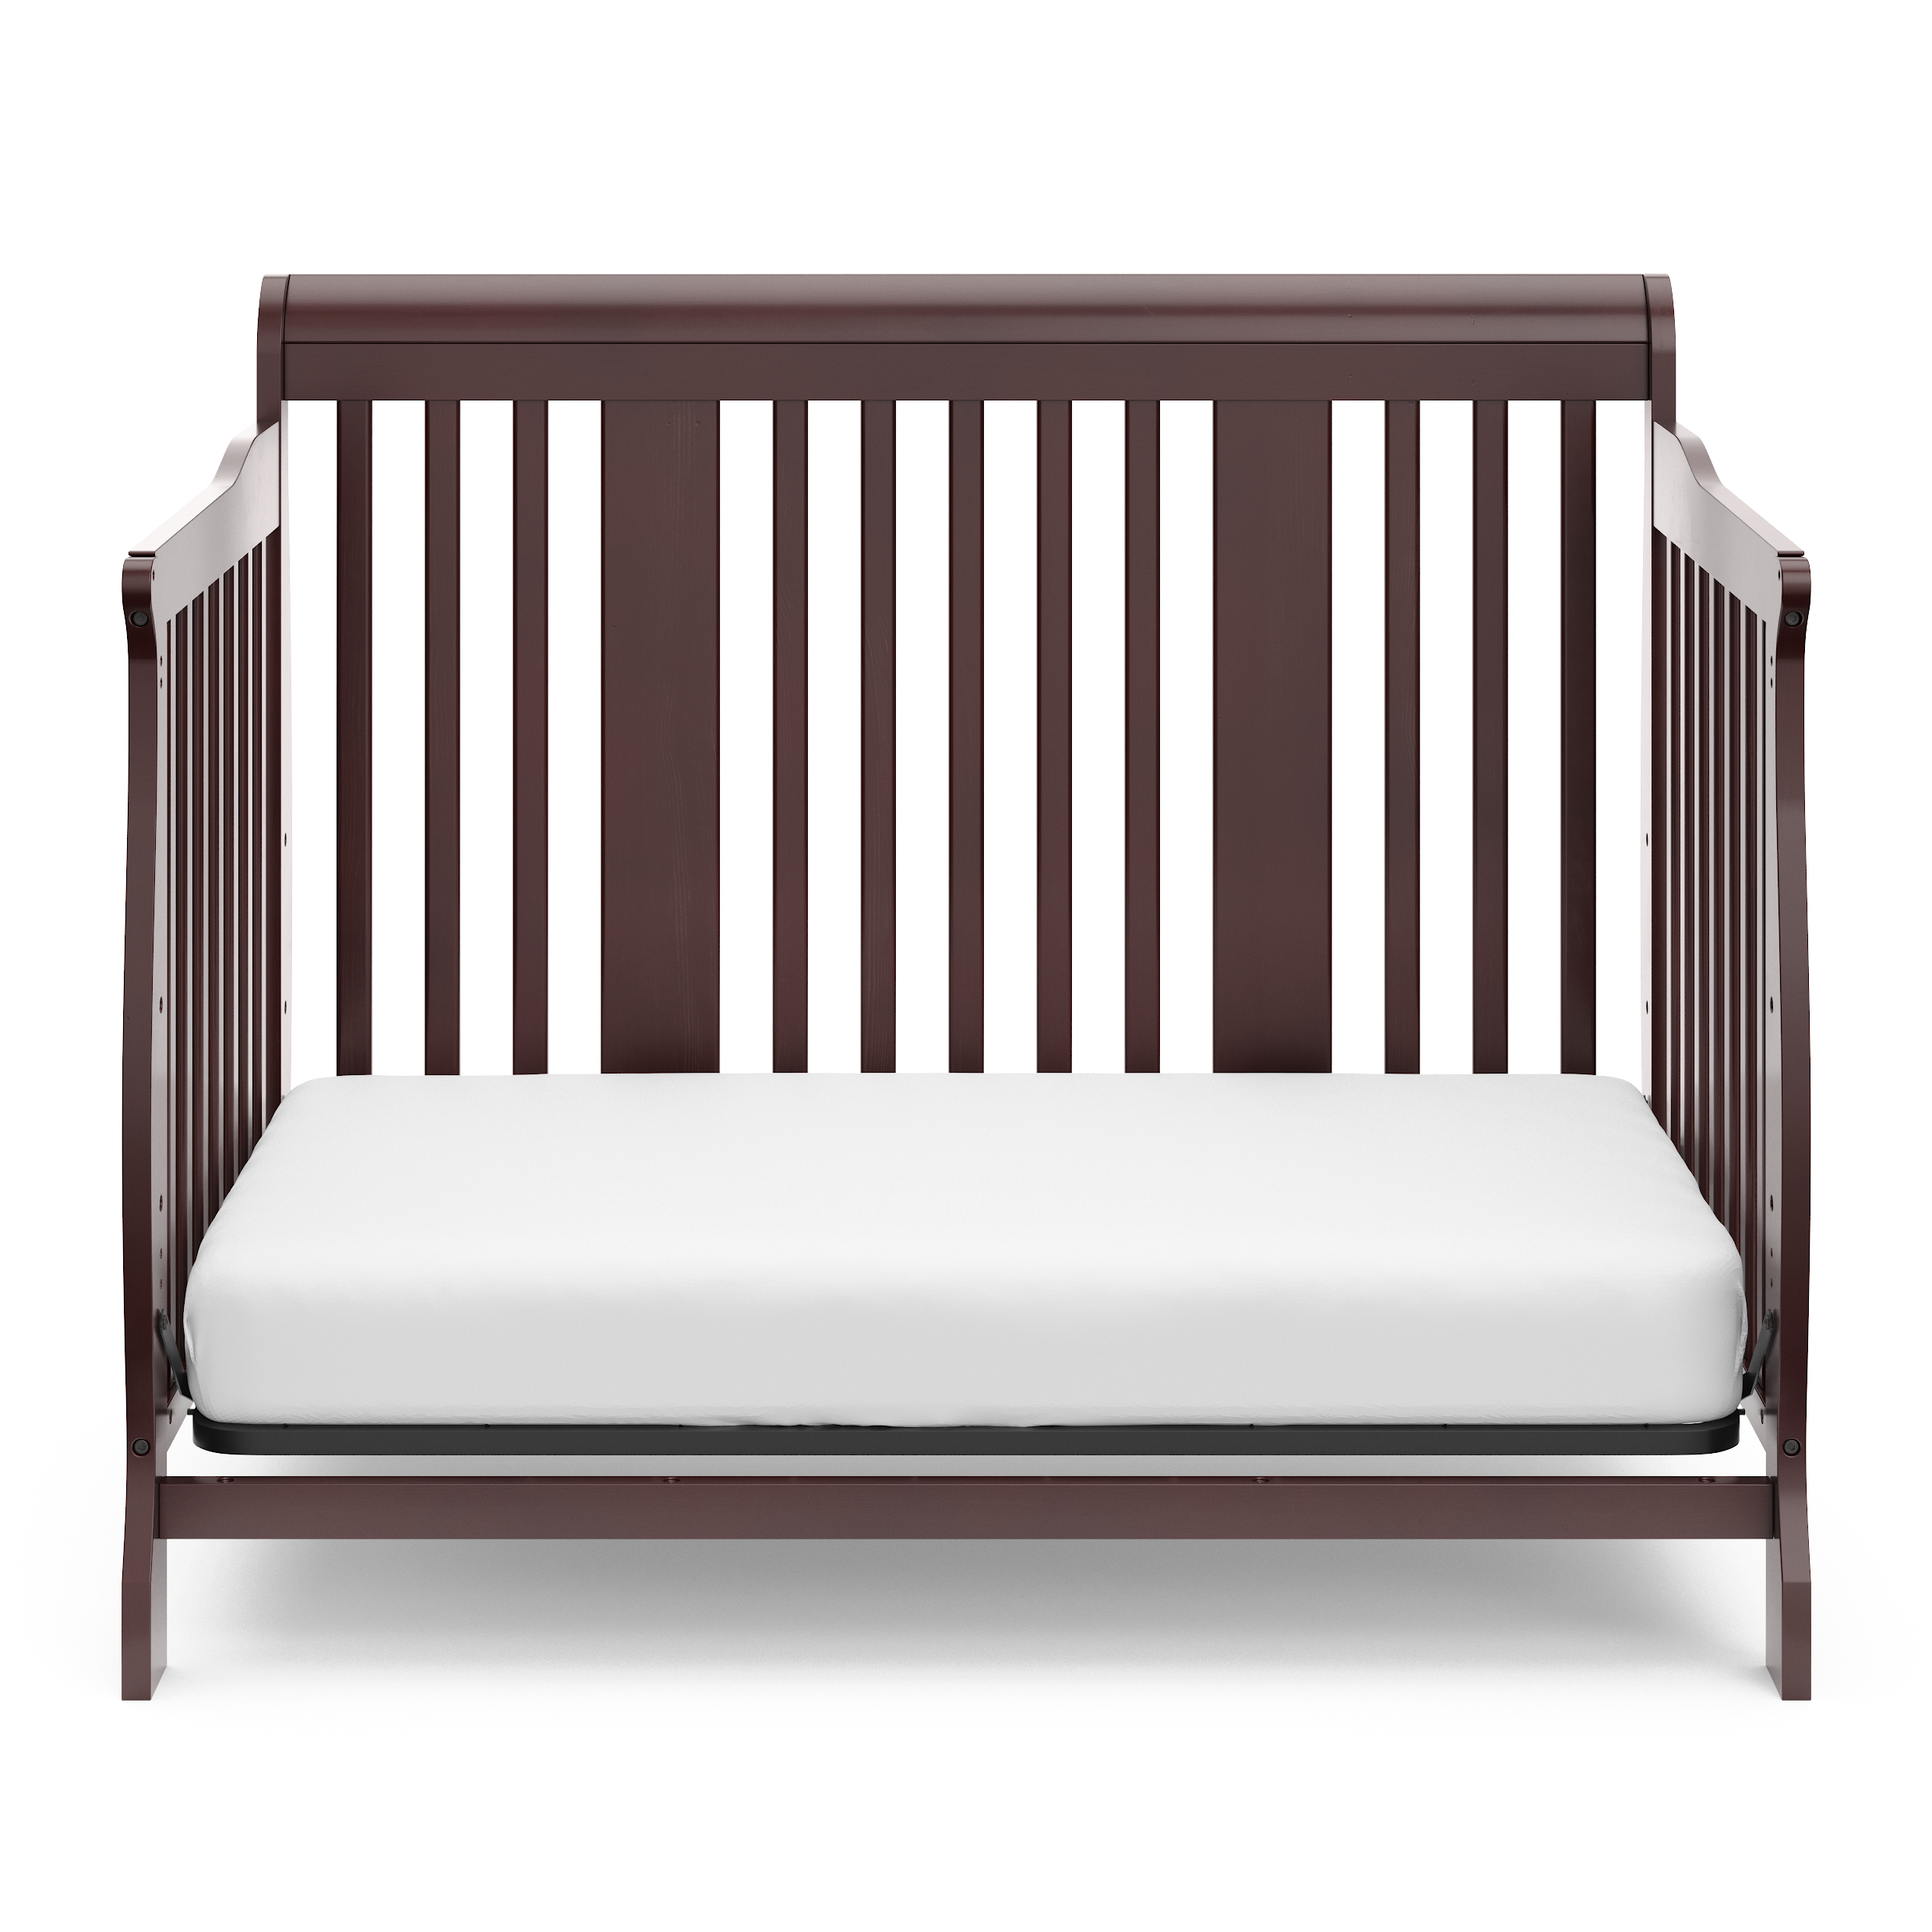 Storkcraft Tuscany 4-in-1 Convertible Baby Crib Espresso - image 5 of 9